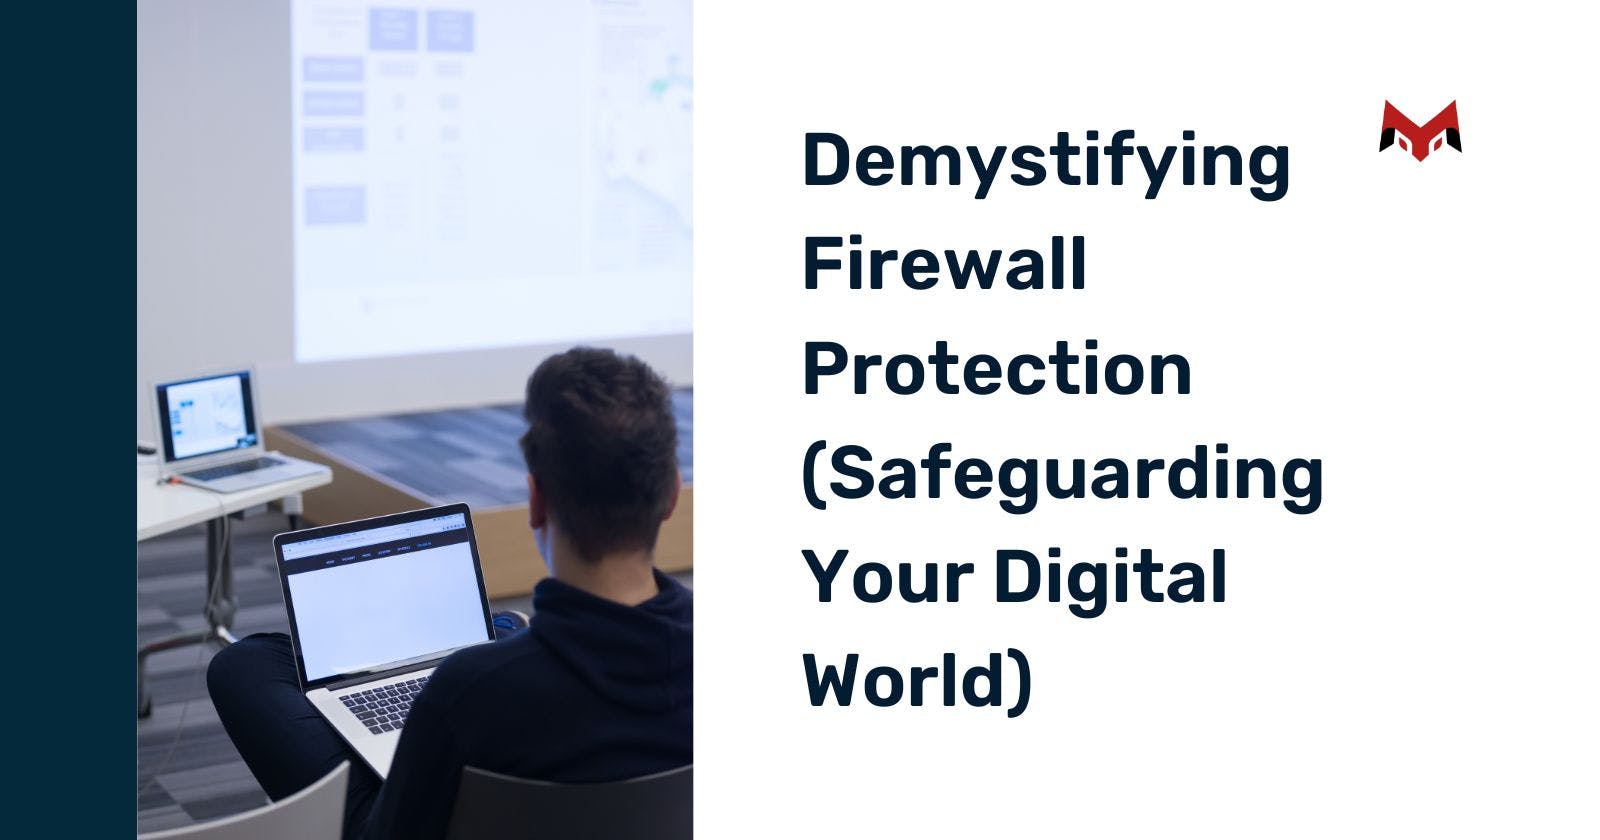 Demystifying Firewall Protection (Safeguarding Your Digital World)